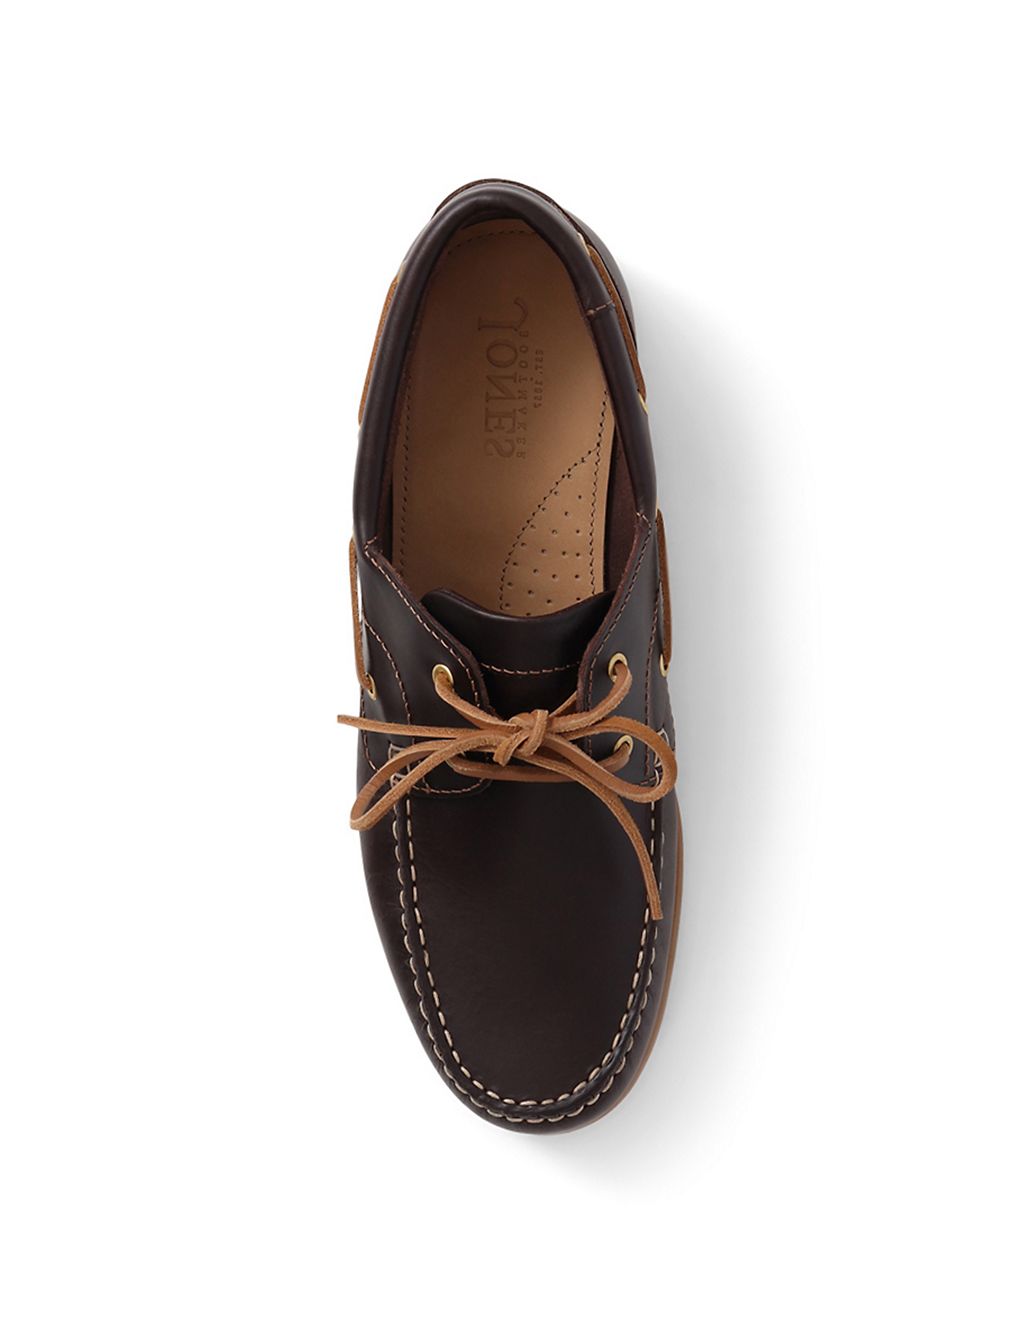 Leather Boat Shoes 4 of 7